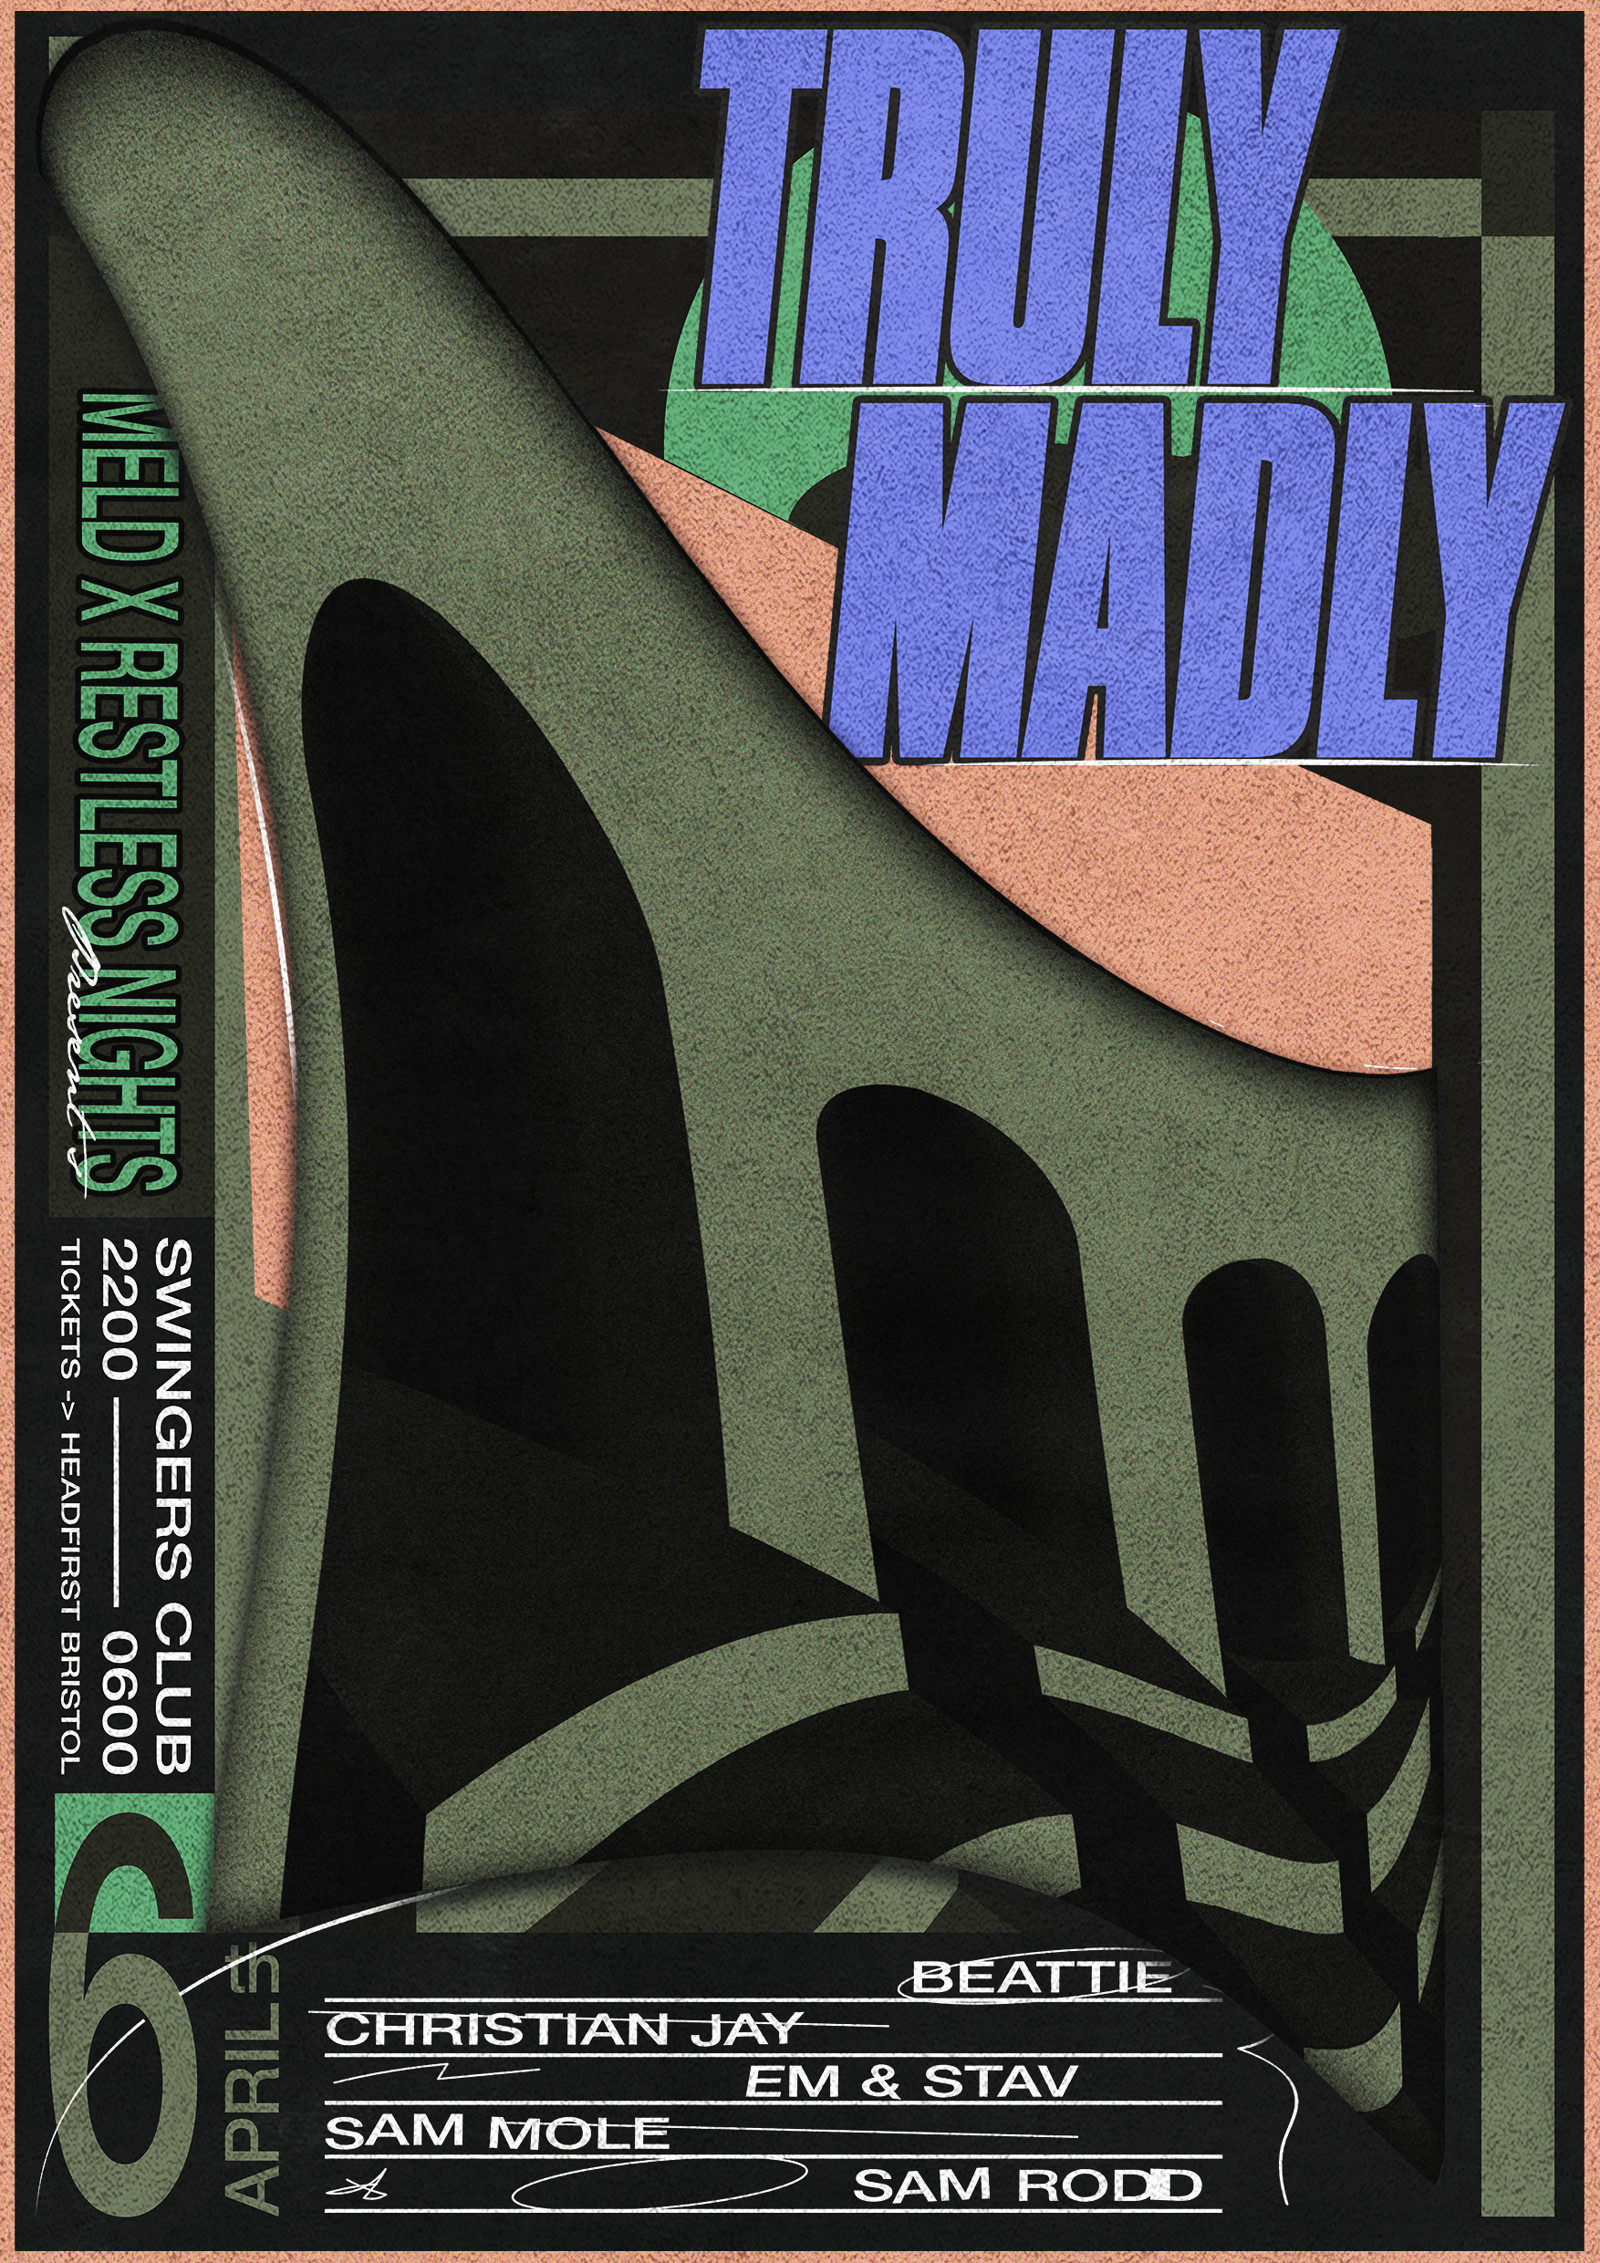 Meld X Restless Nights Present: Truly Madly at Dare to Club